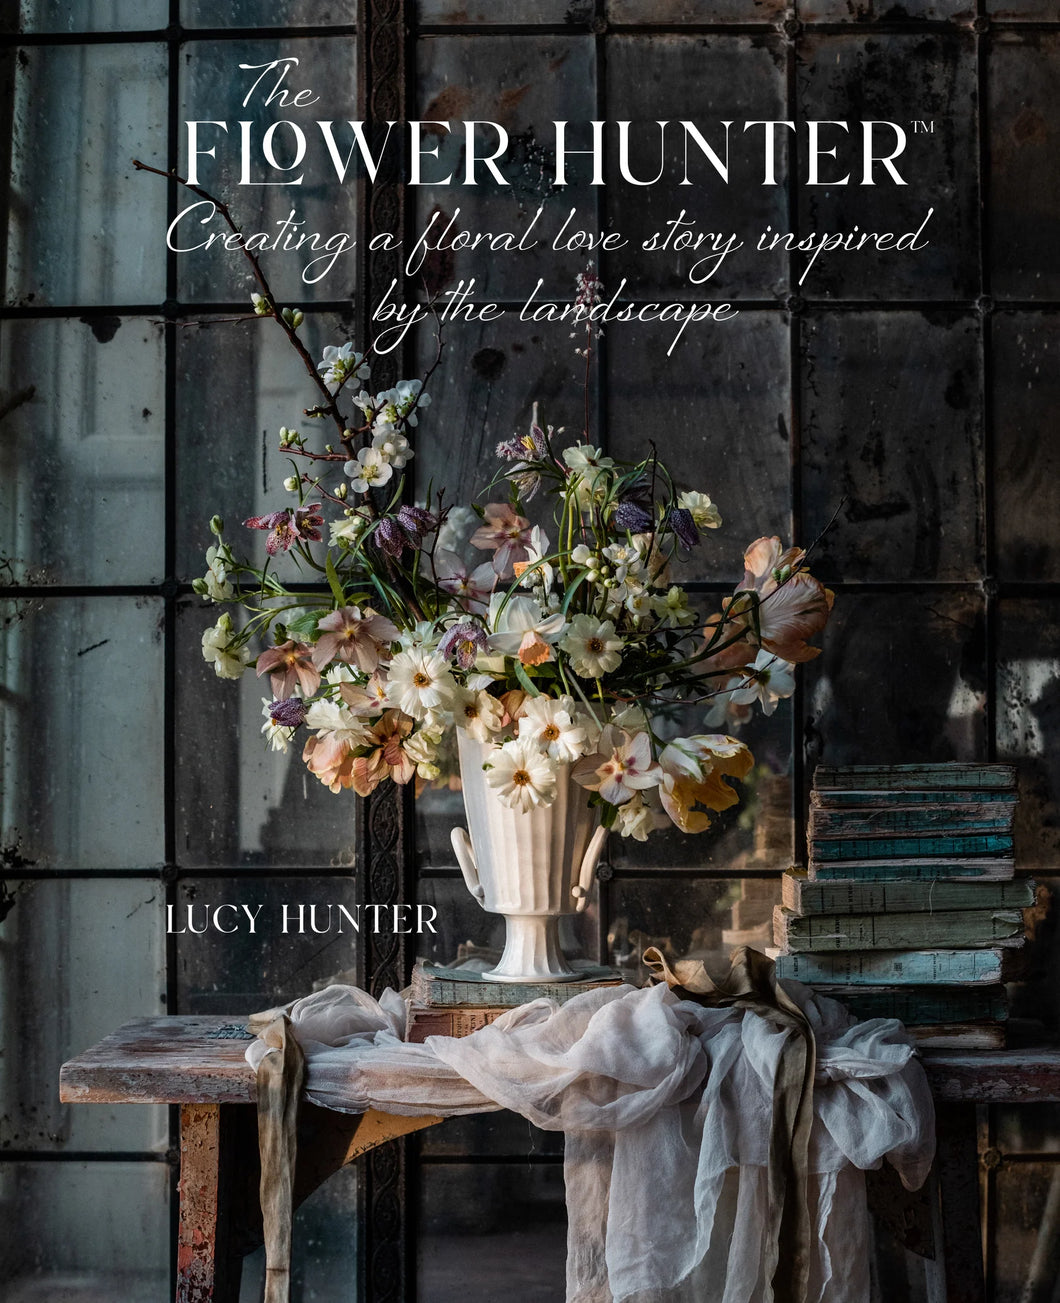 The Flower Hunter by Lucy Hunter ~ Creating a Floral Love Story Inspired by the Landscape